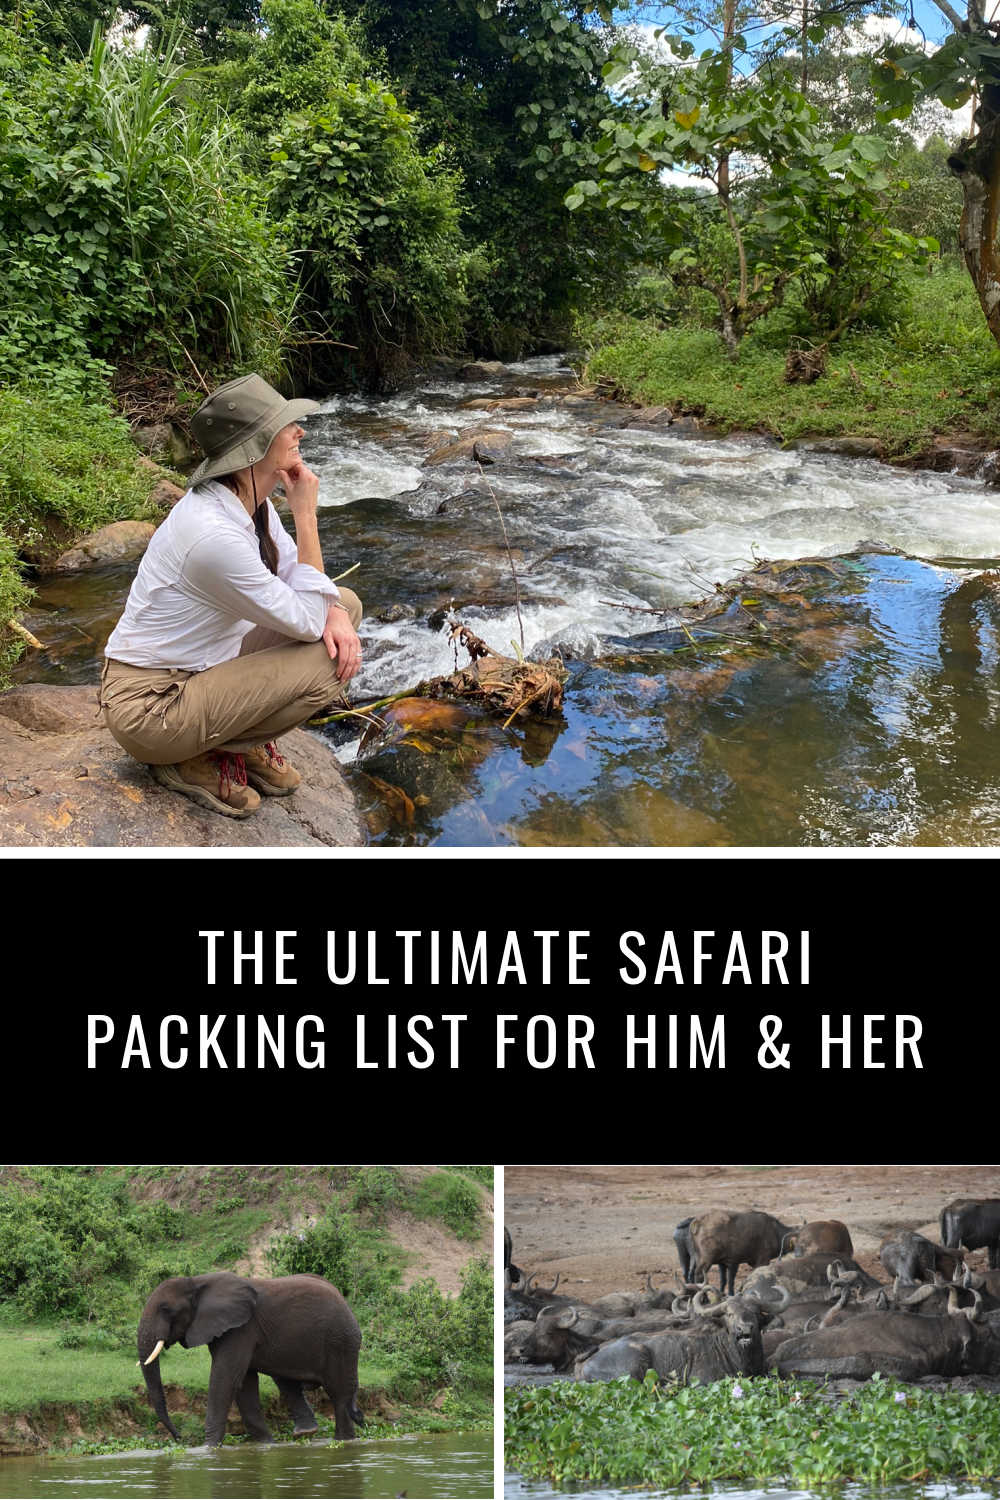 SAFARI PACKING LIST FOR COUPLES